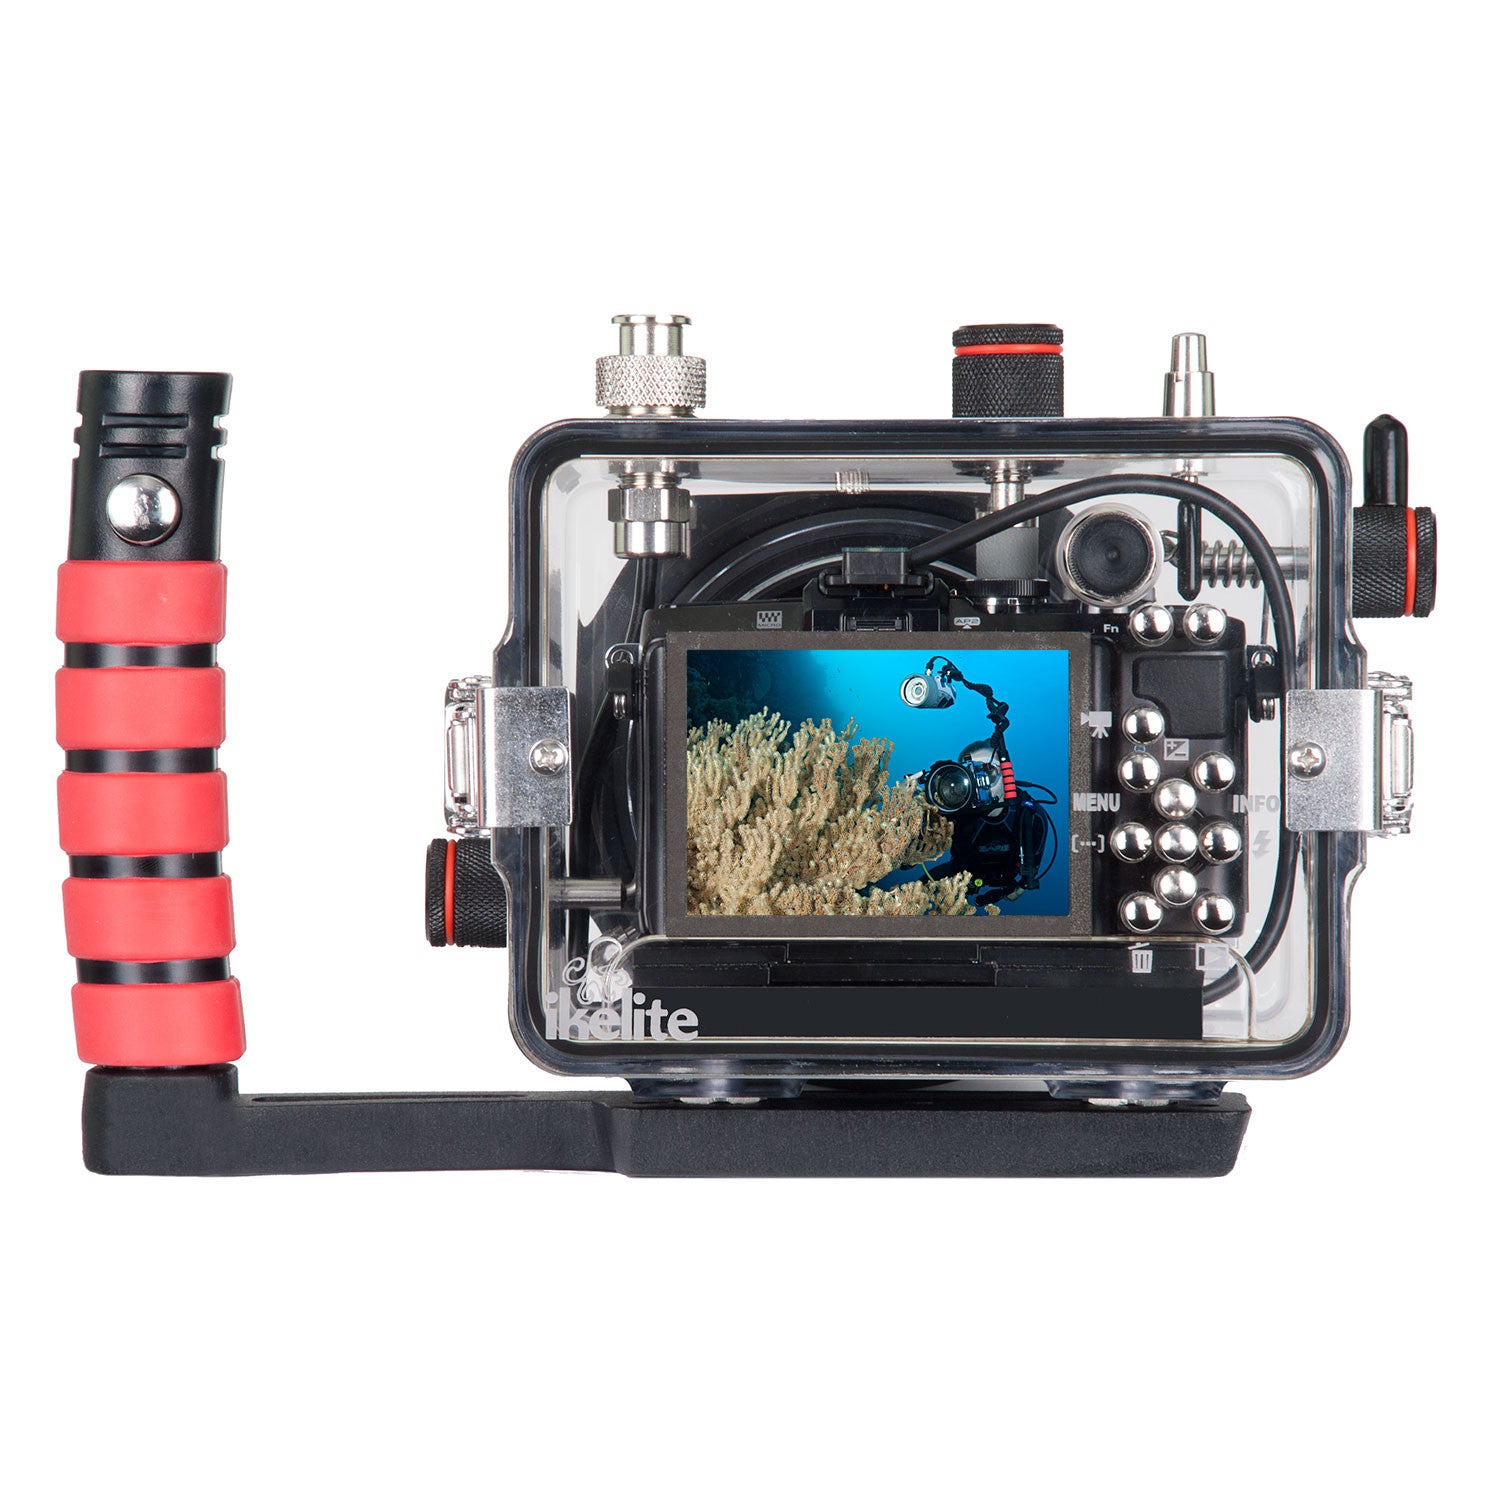 200DLM/A Underwater TTL Housing for Olympus PEN E-PL7 Mirrorless Micro Four-Thirds Cameras